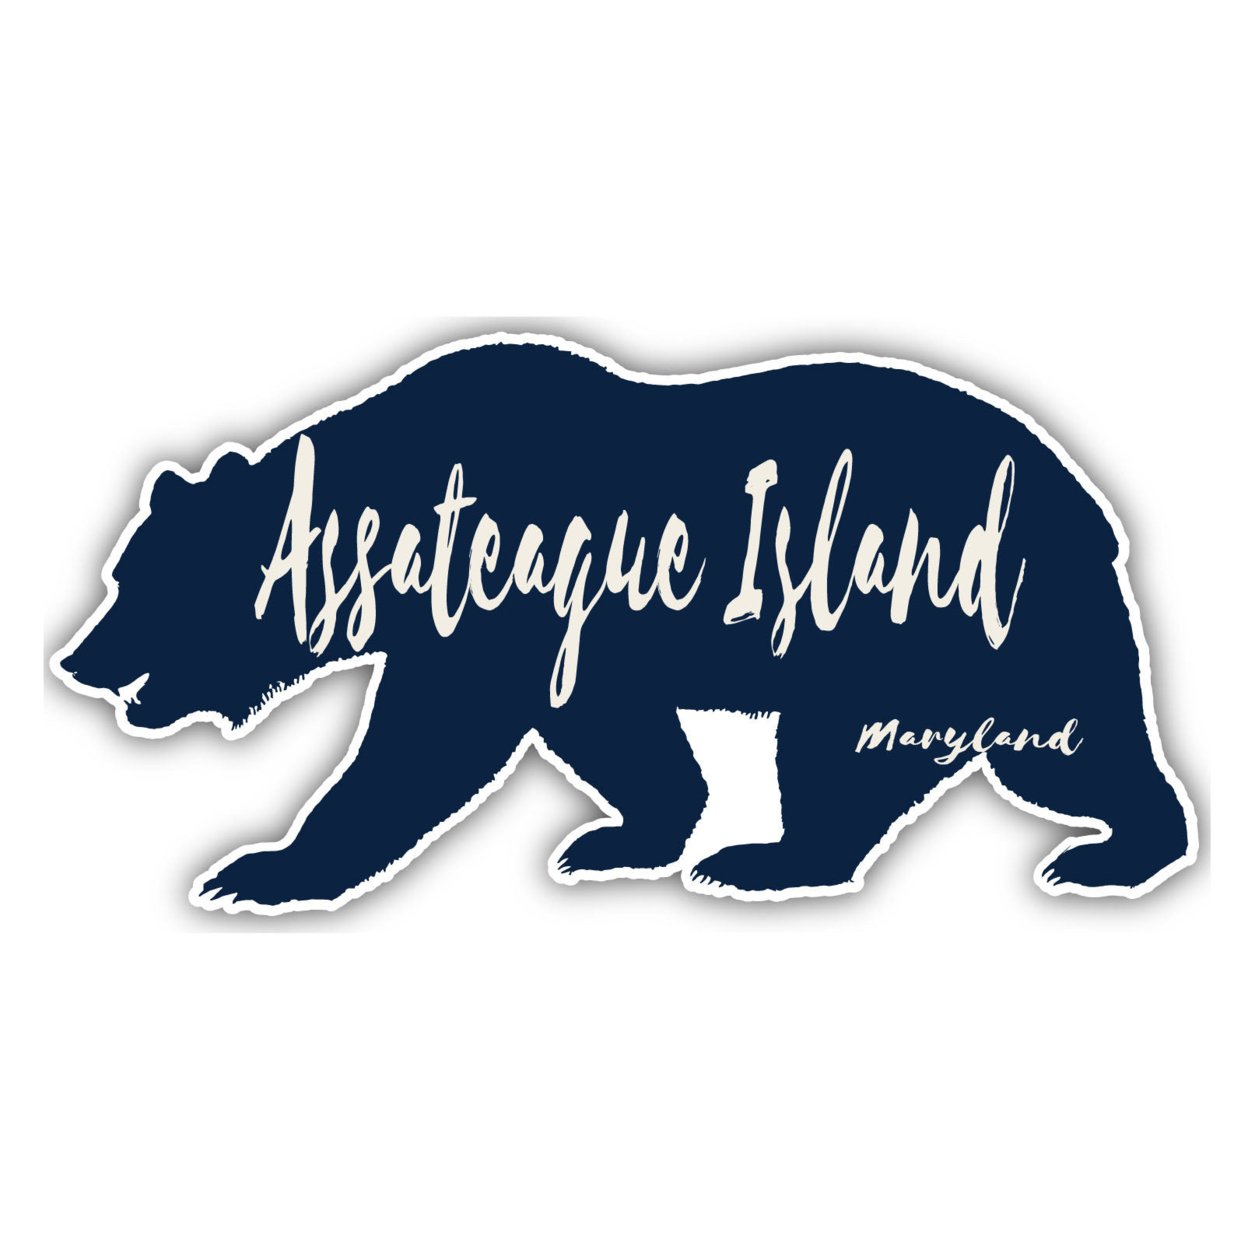 Assateague Island Maryland Souvenir Decorative Stickers (Choose Theme And Size) - 4-Pack, 8-Inch, Bear